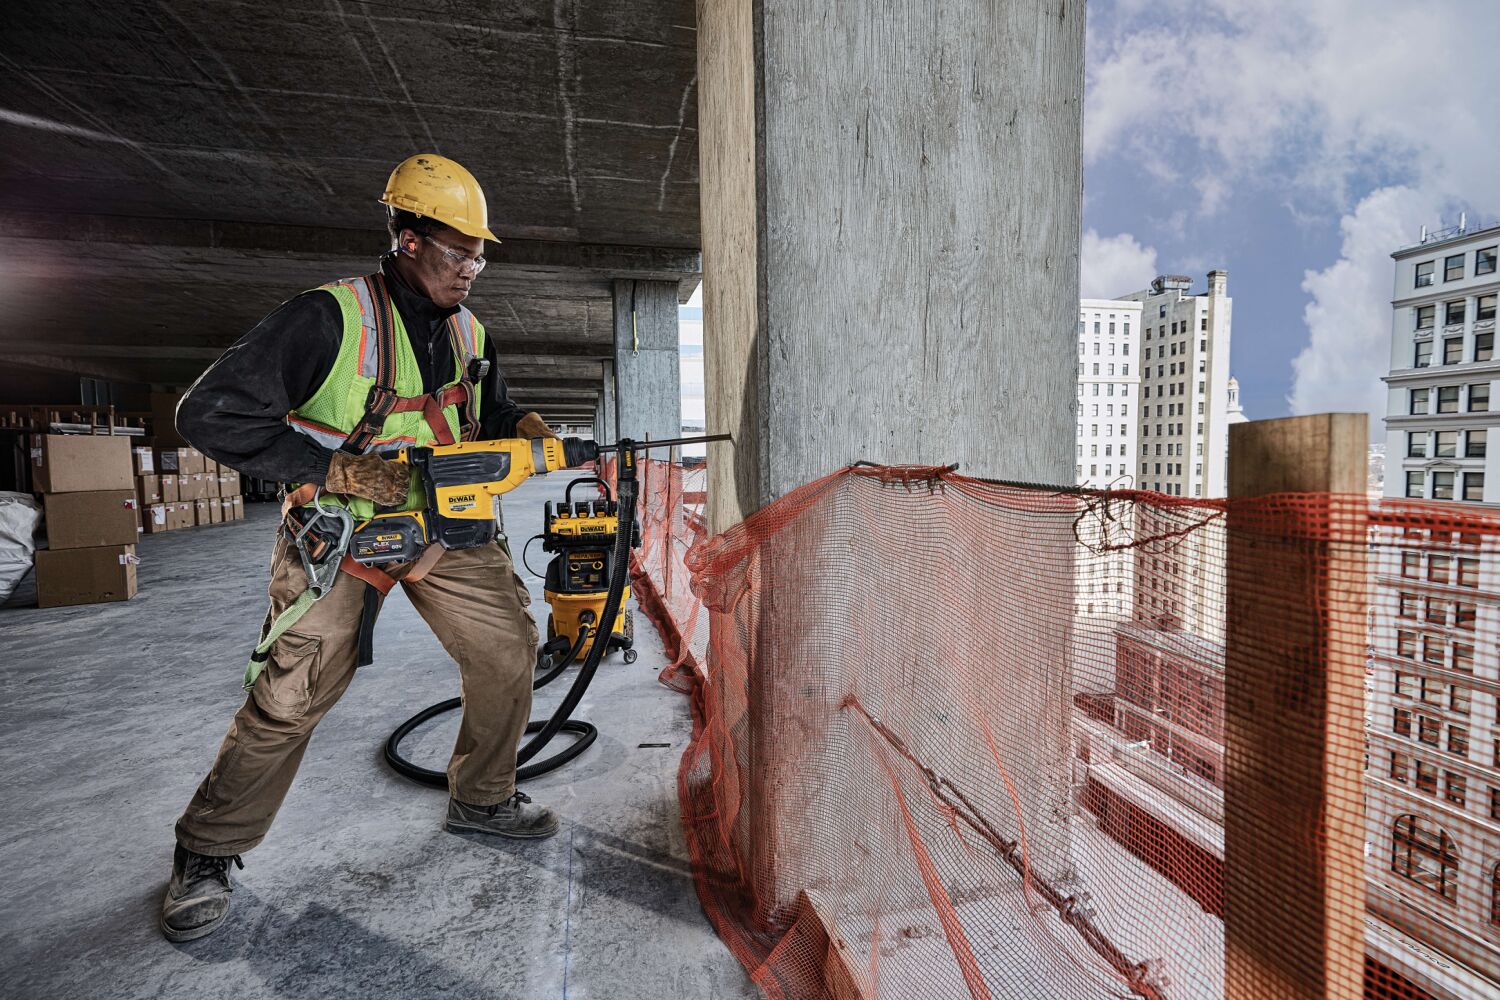 Brushless, cordless SDS MAX combination rotary hammer being used by a person